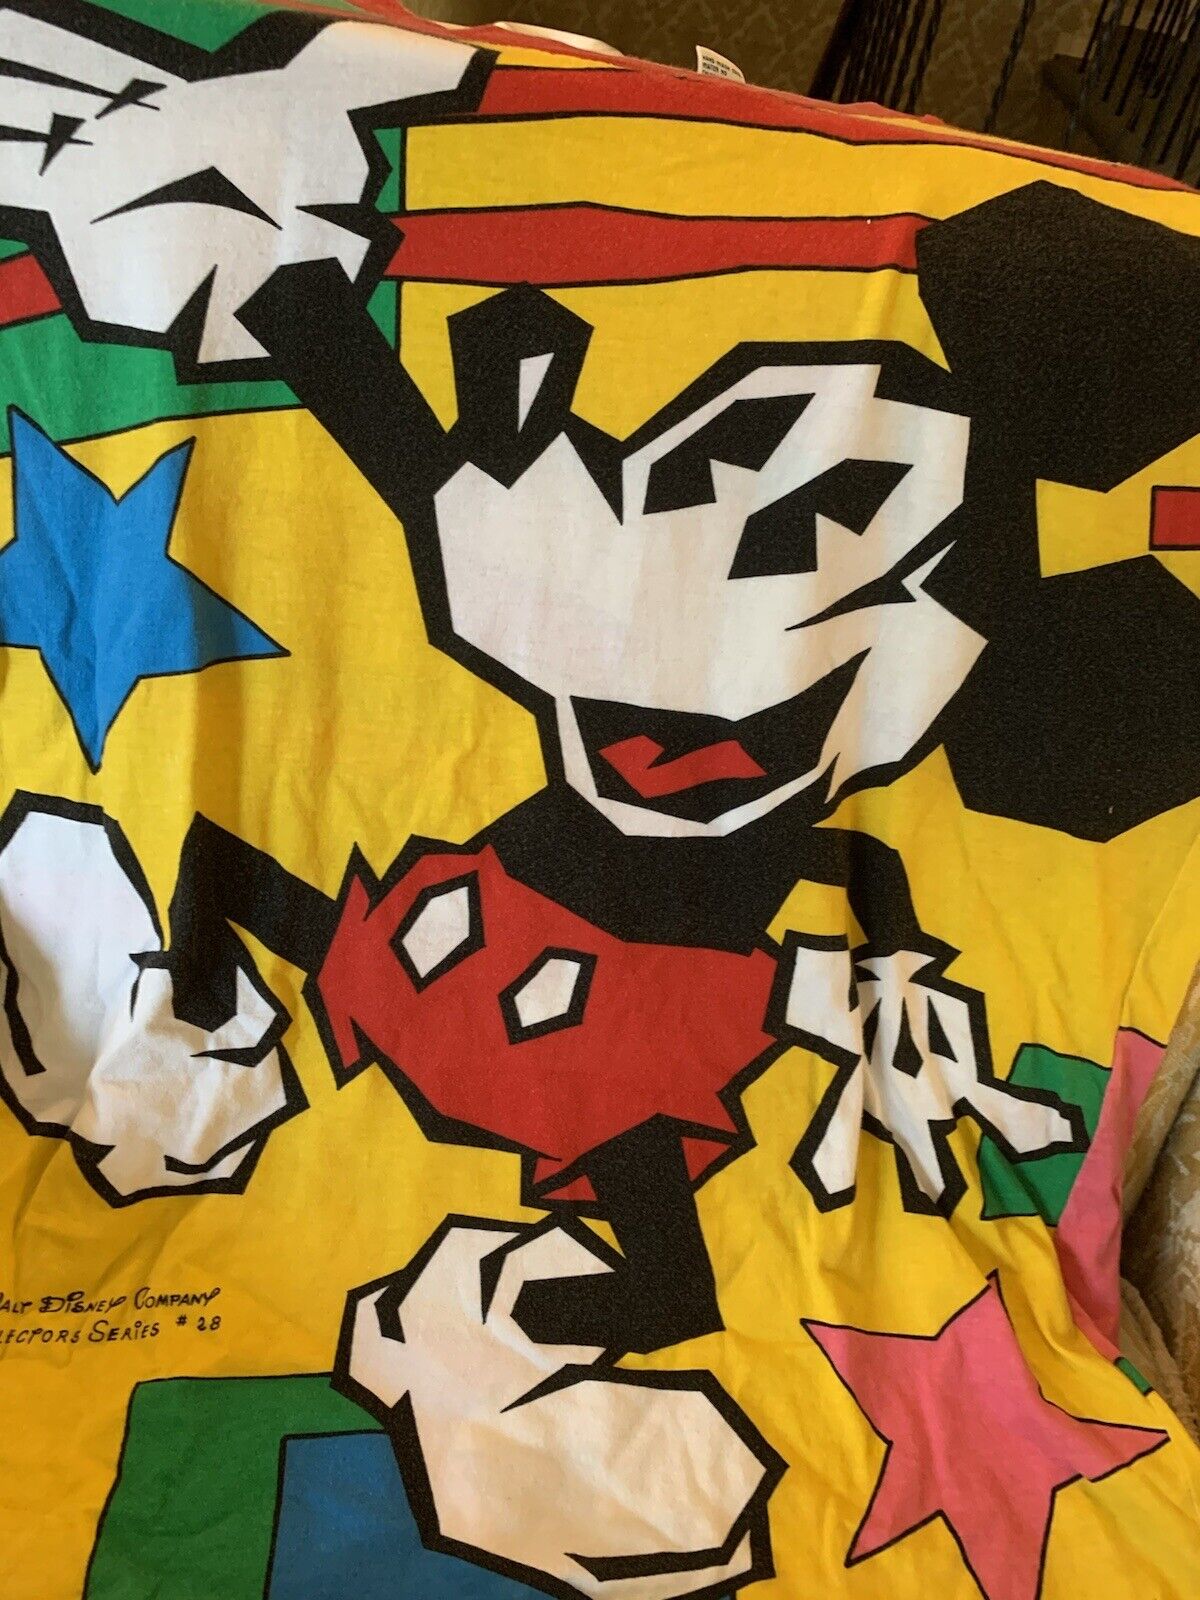 Vintage 1960s Psychedelic Disney Mickey Mouse Unisex T Shirt Size L 100% Cotton